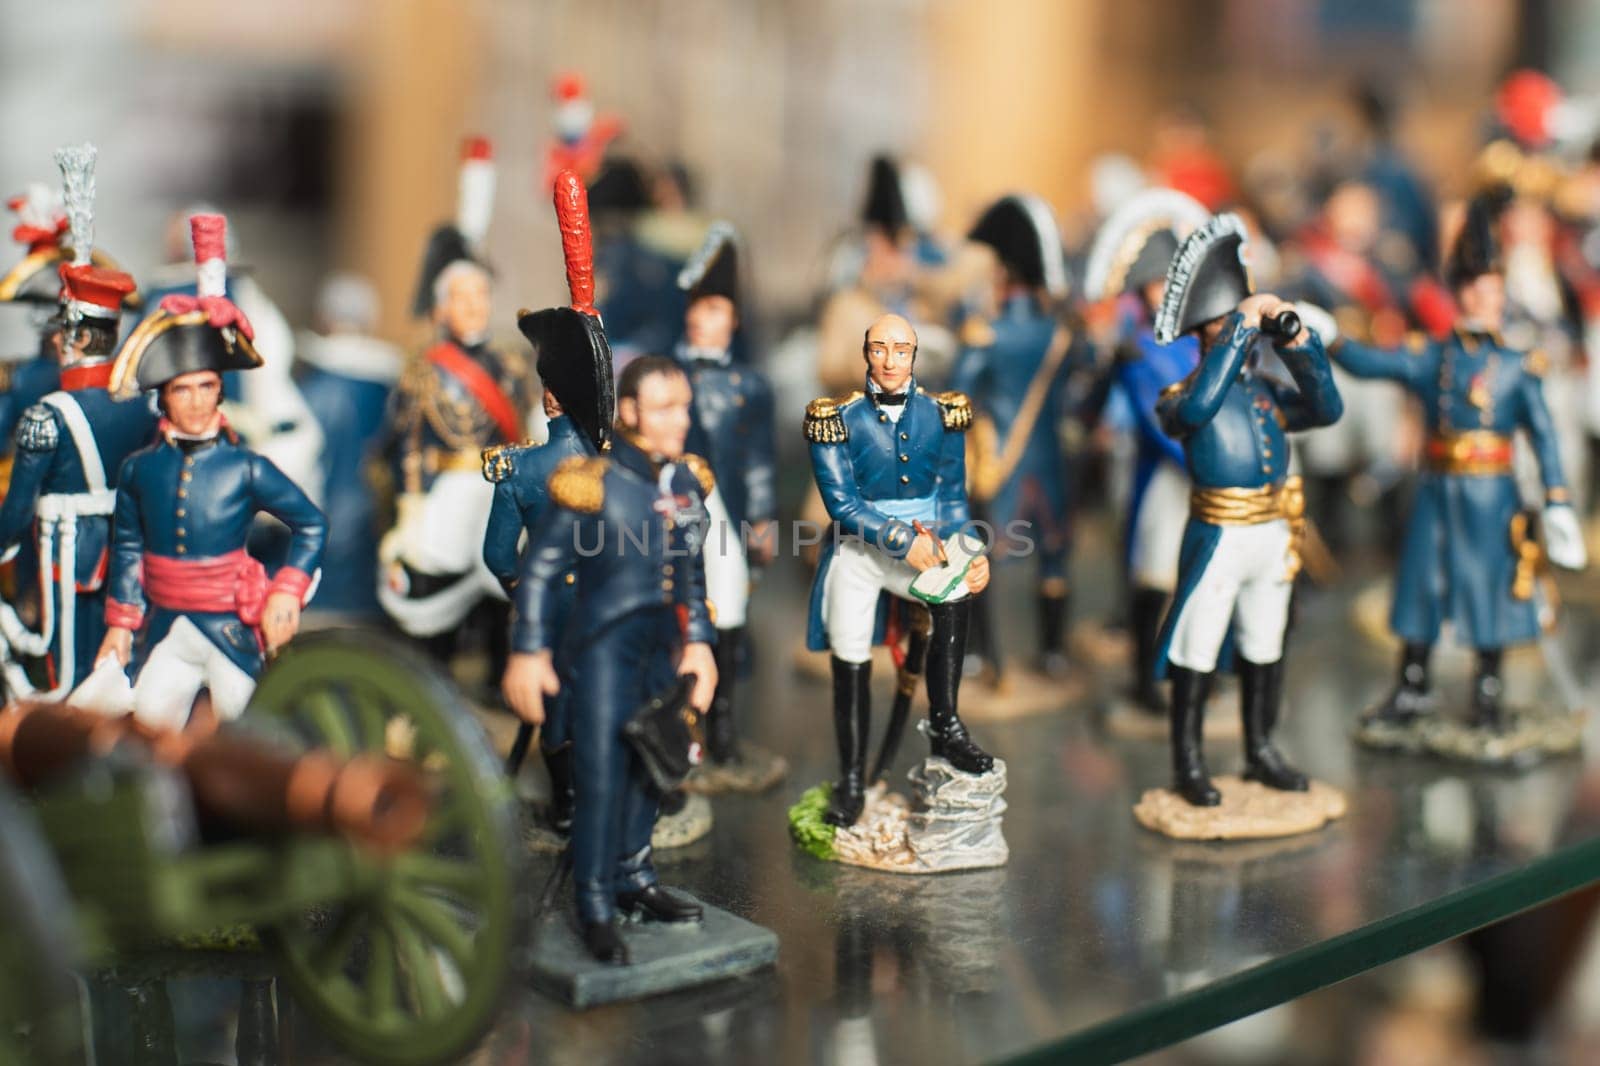 Tin soldiers in uniform in a vintage store by Godi